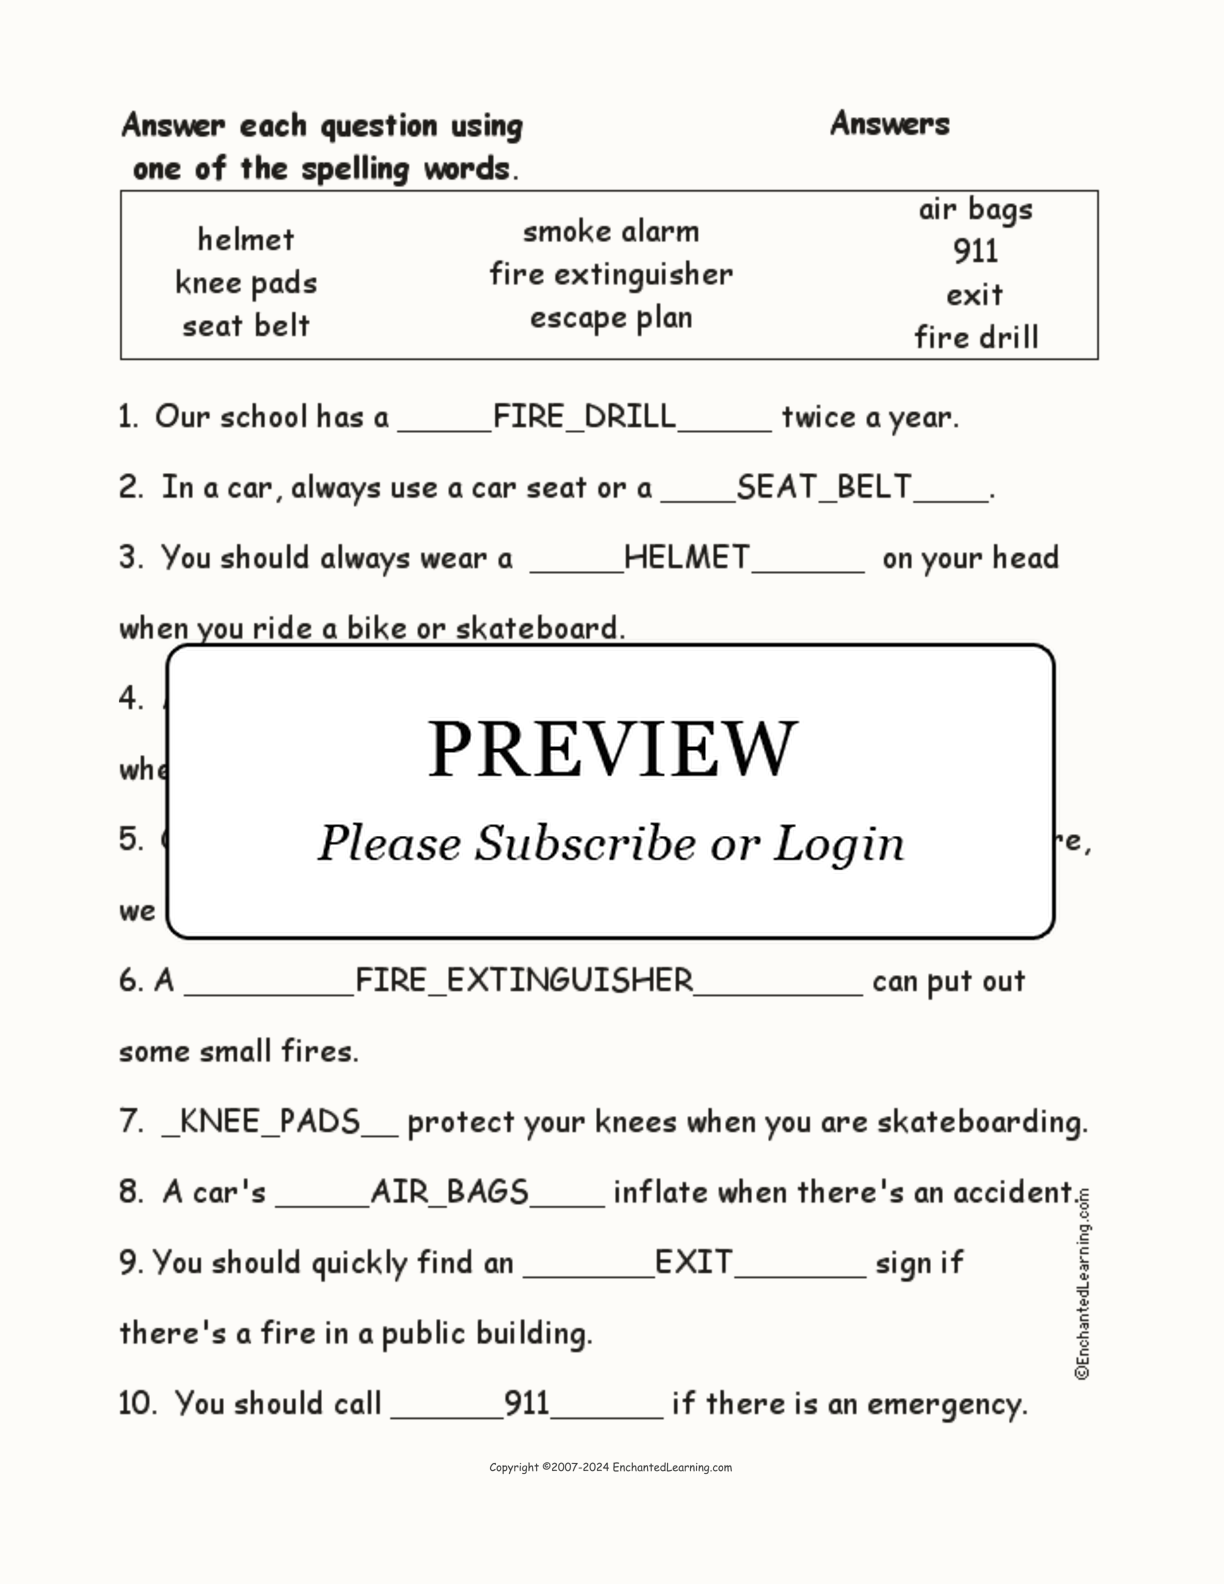 Safety: Spelling Word Questions interactive worksheet page 2